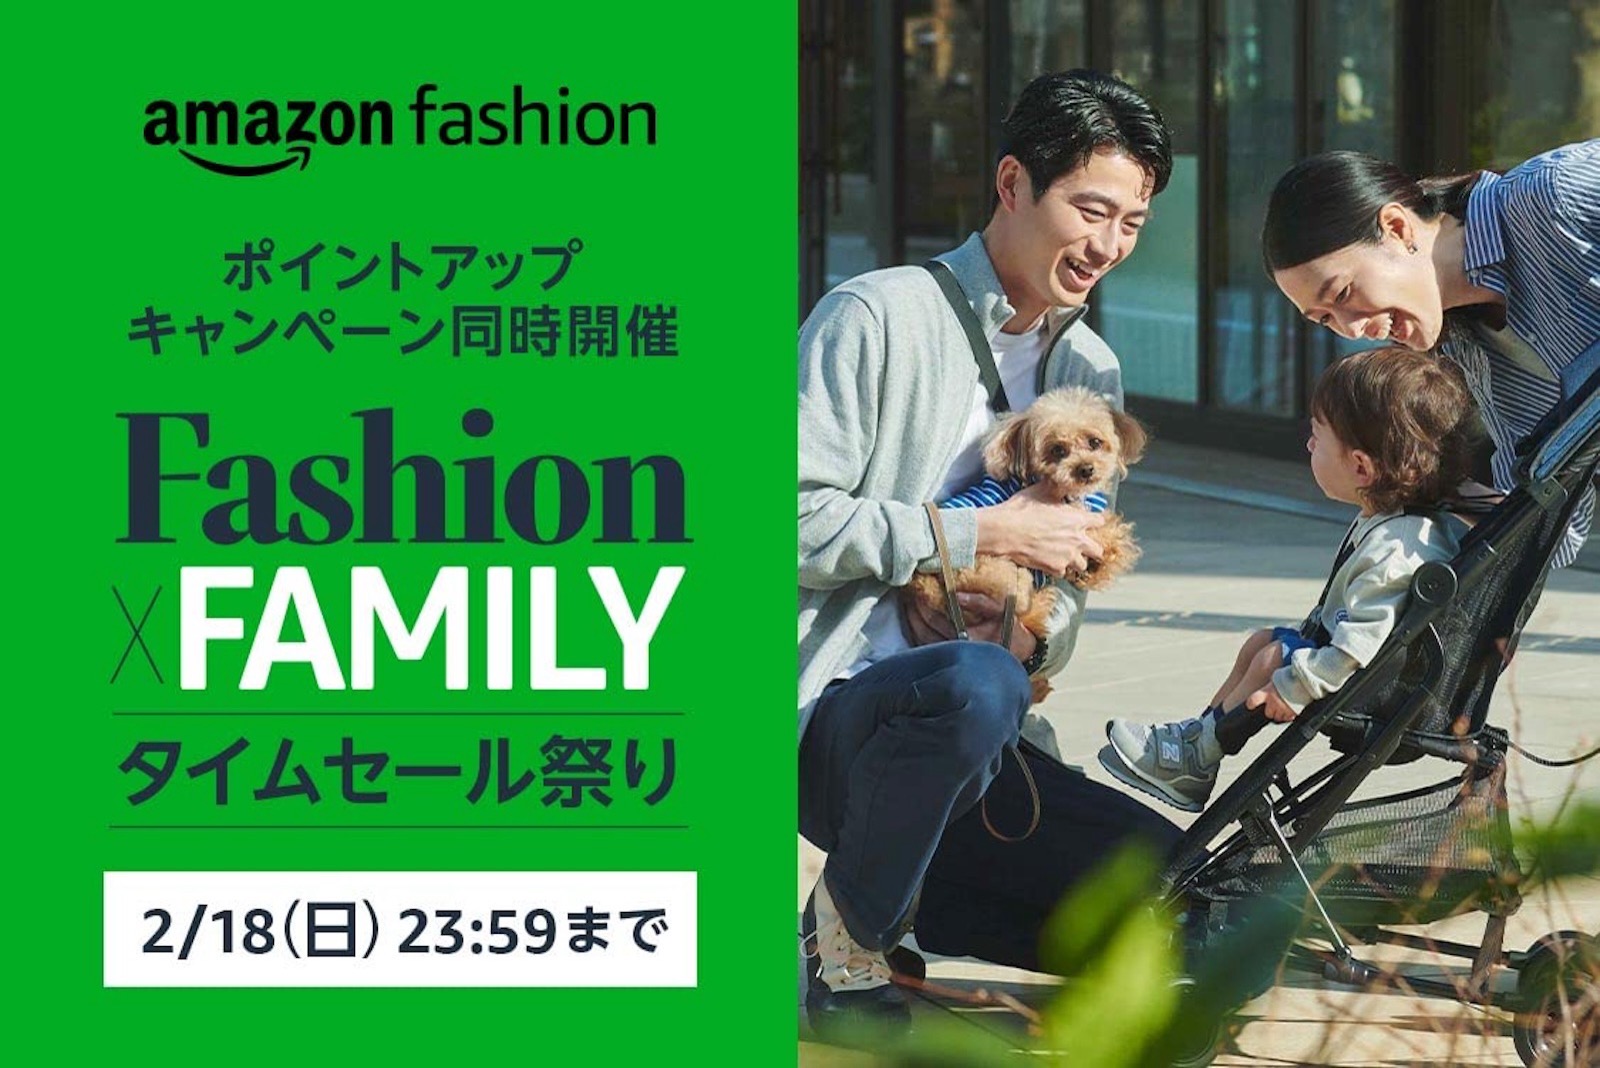 Fashion and Family TimeSale Festival